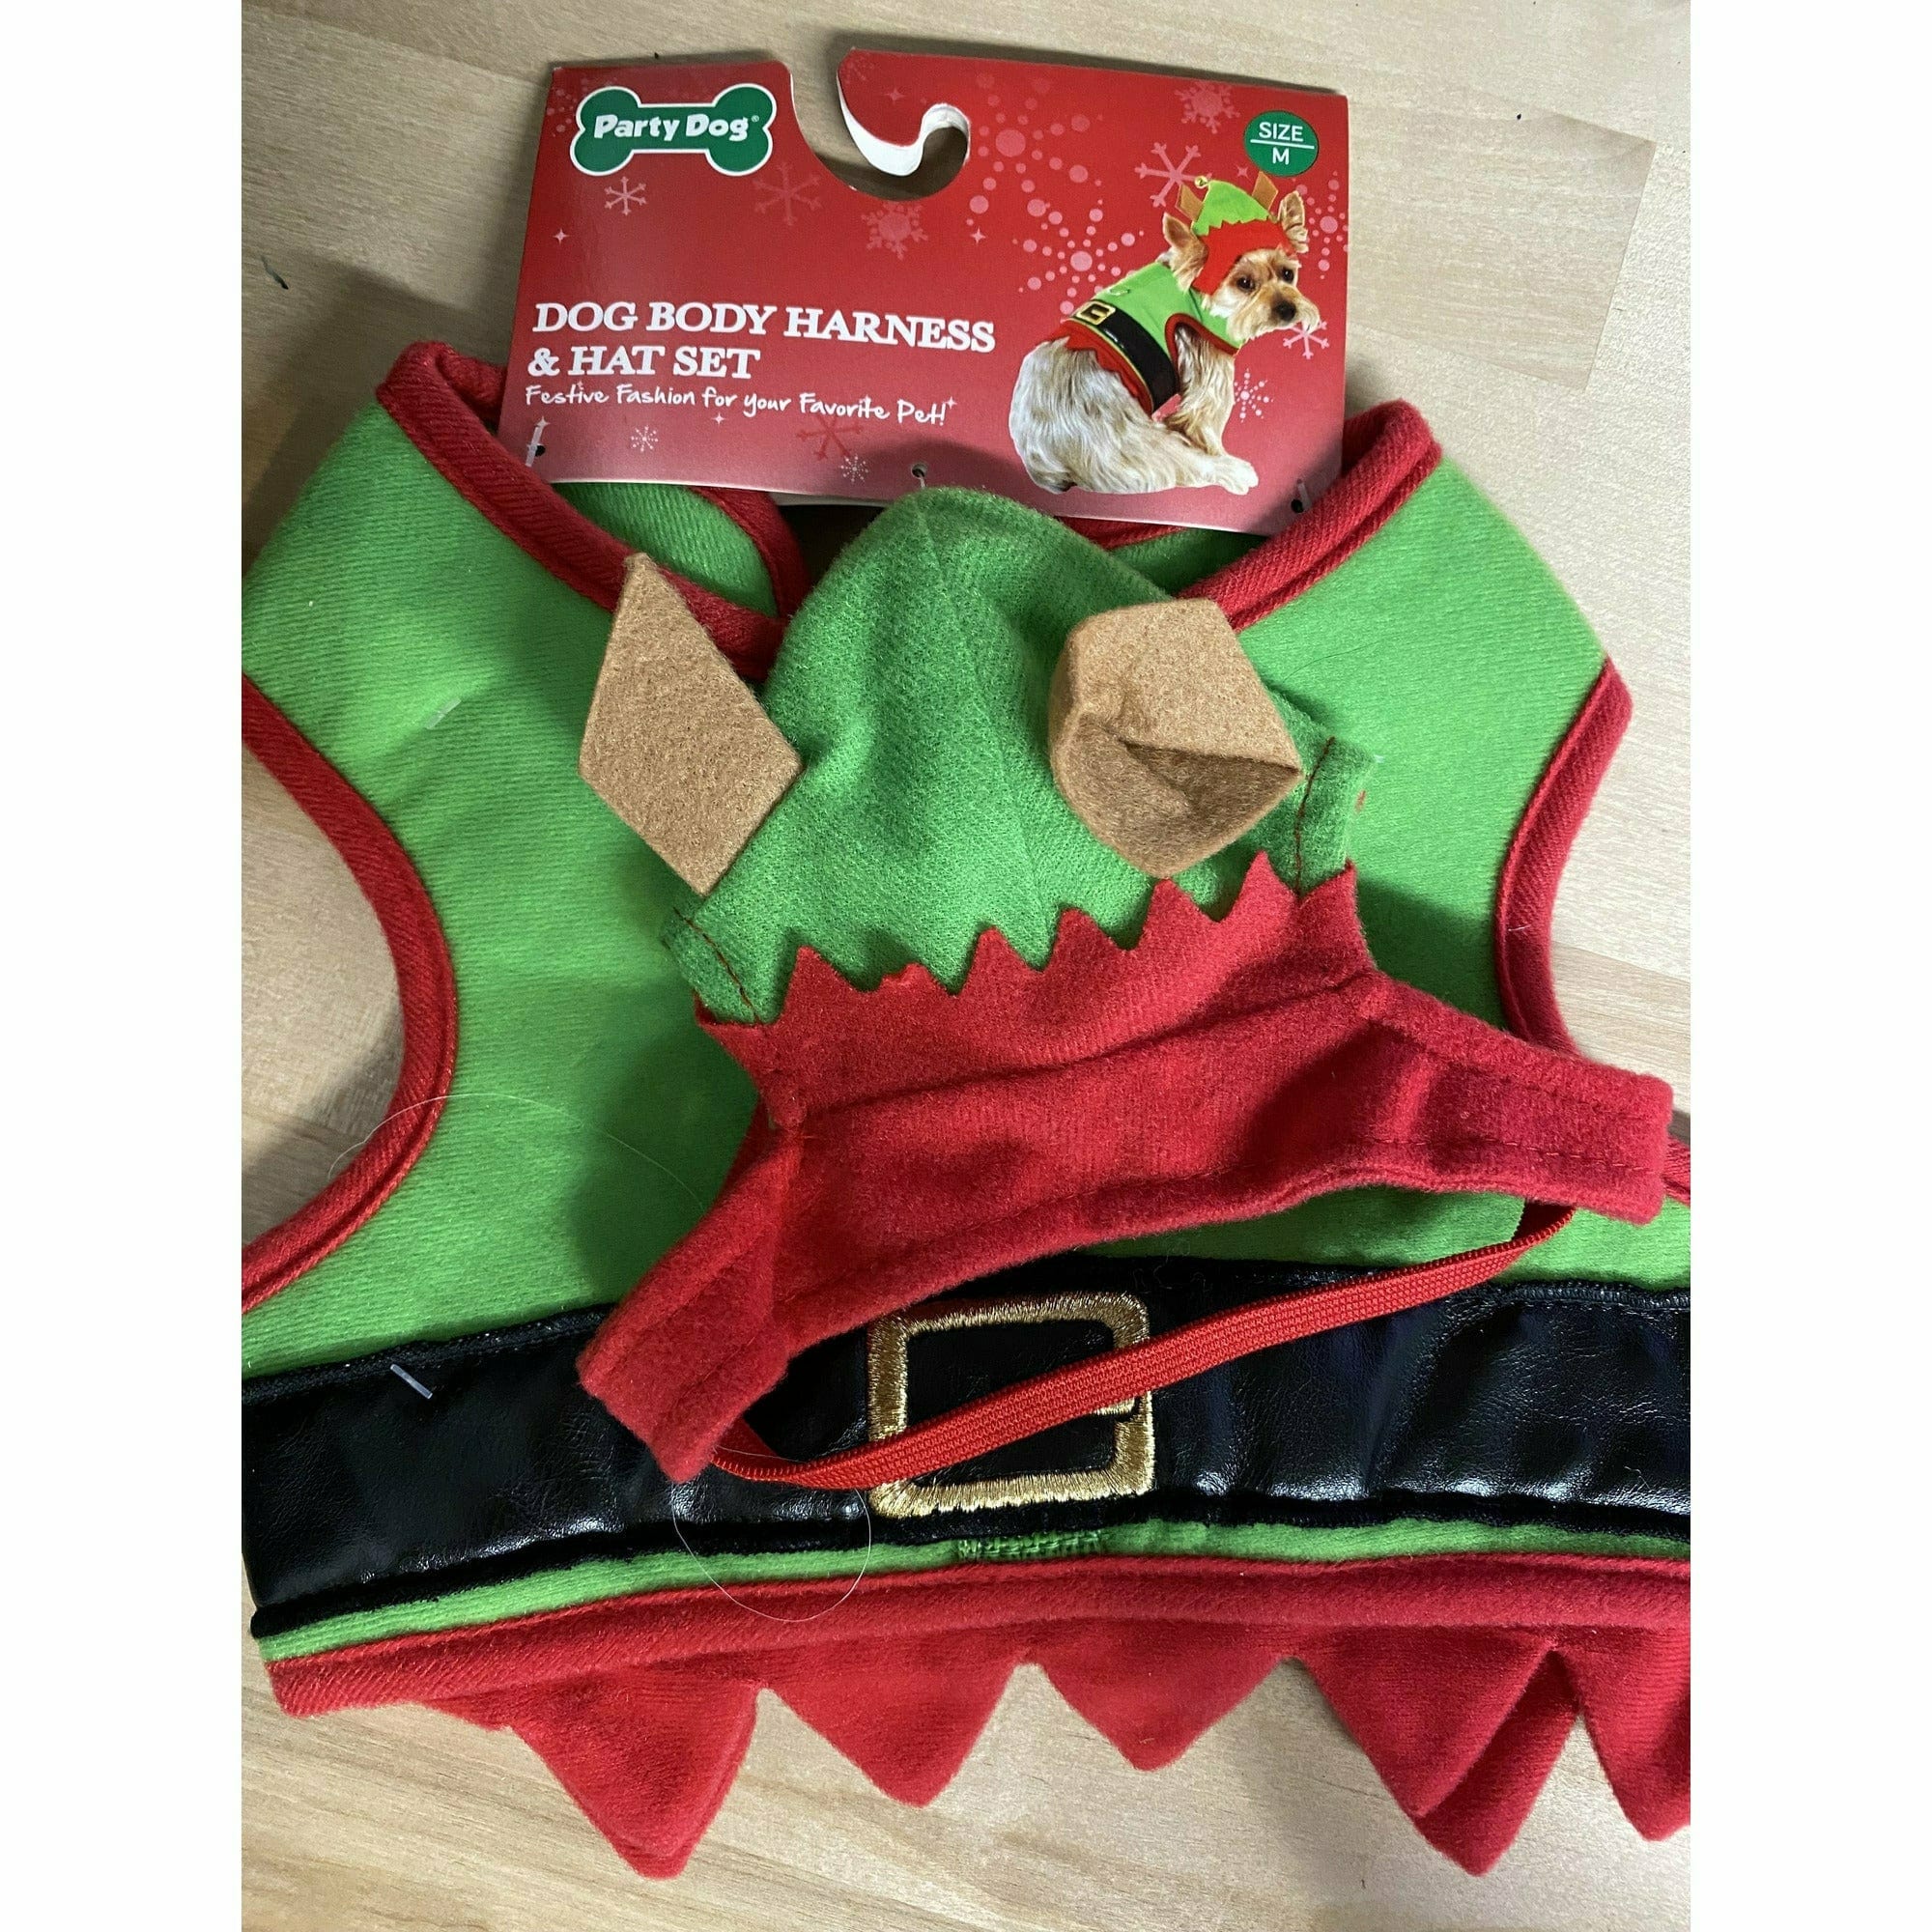 Party Dog HOLIDAY: CHRISTMAS Dog Body Harness and Hat Set Elf